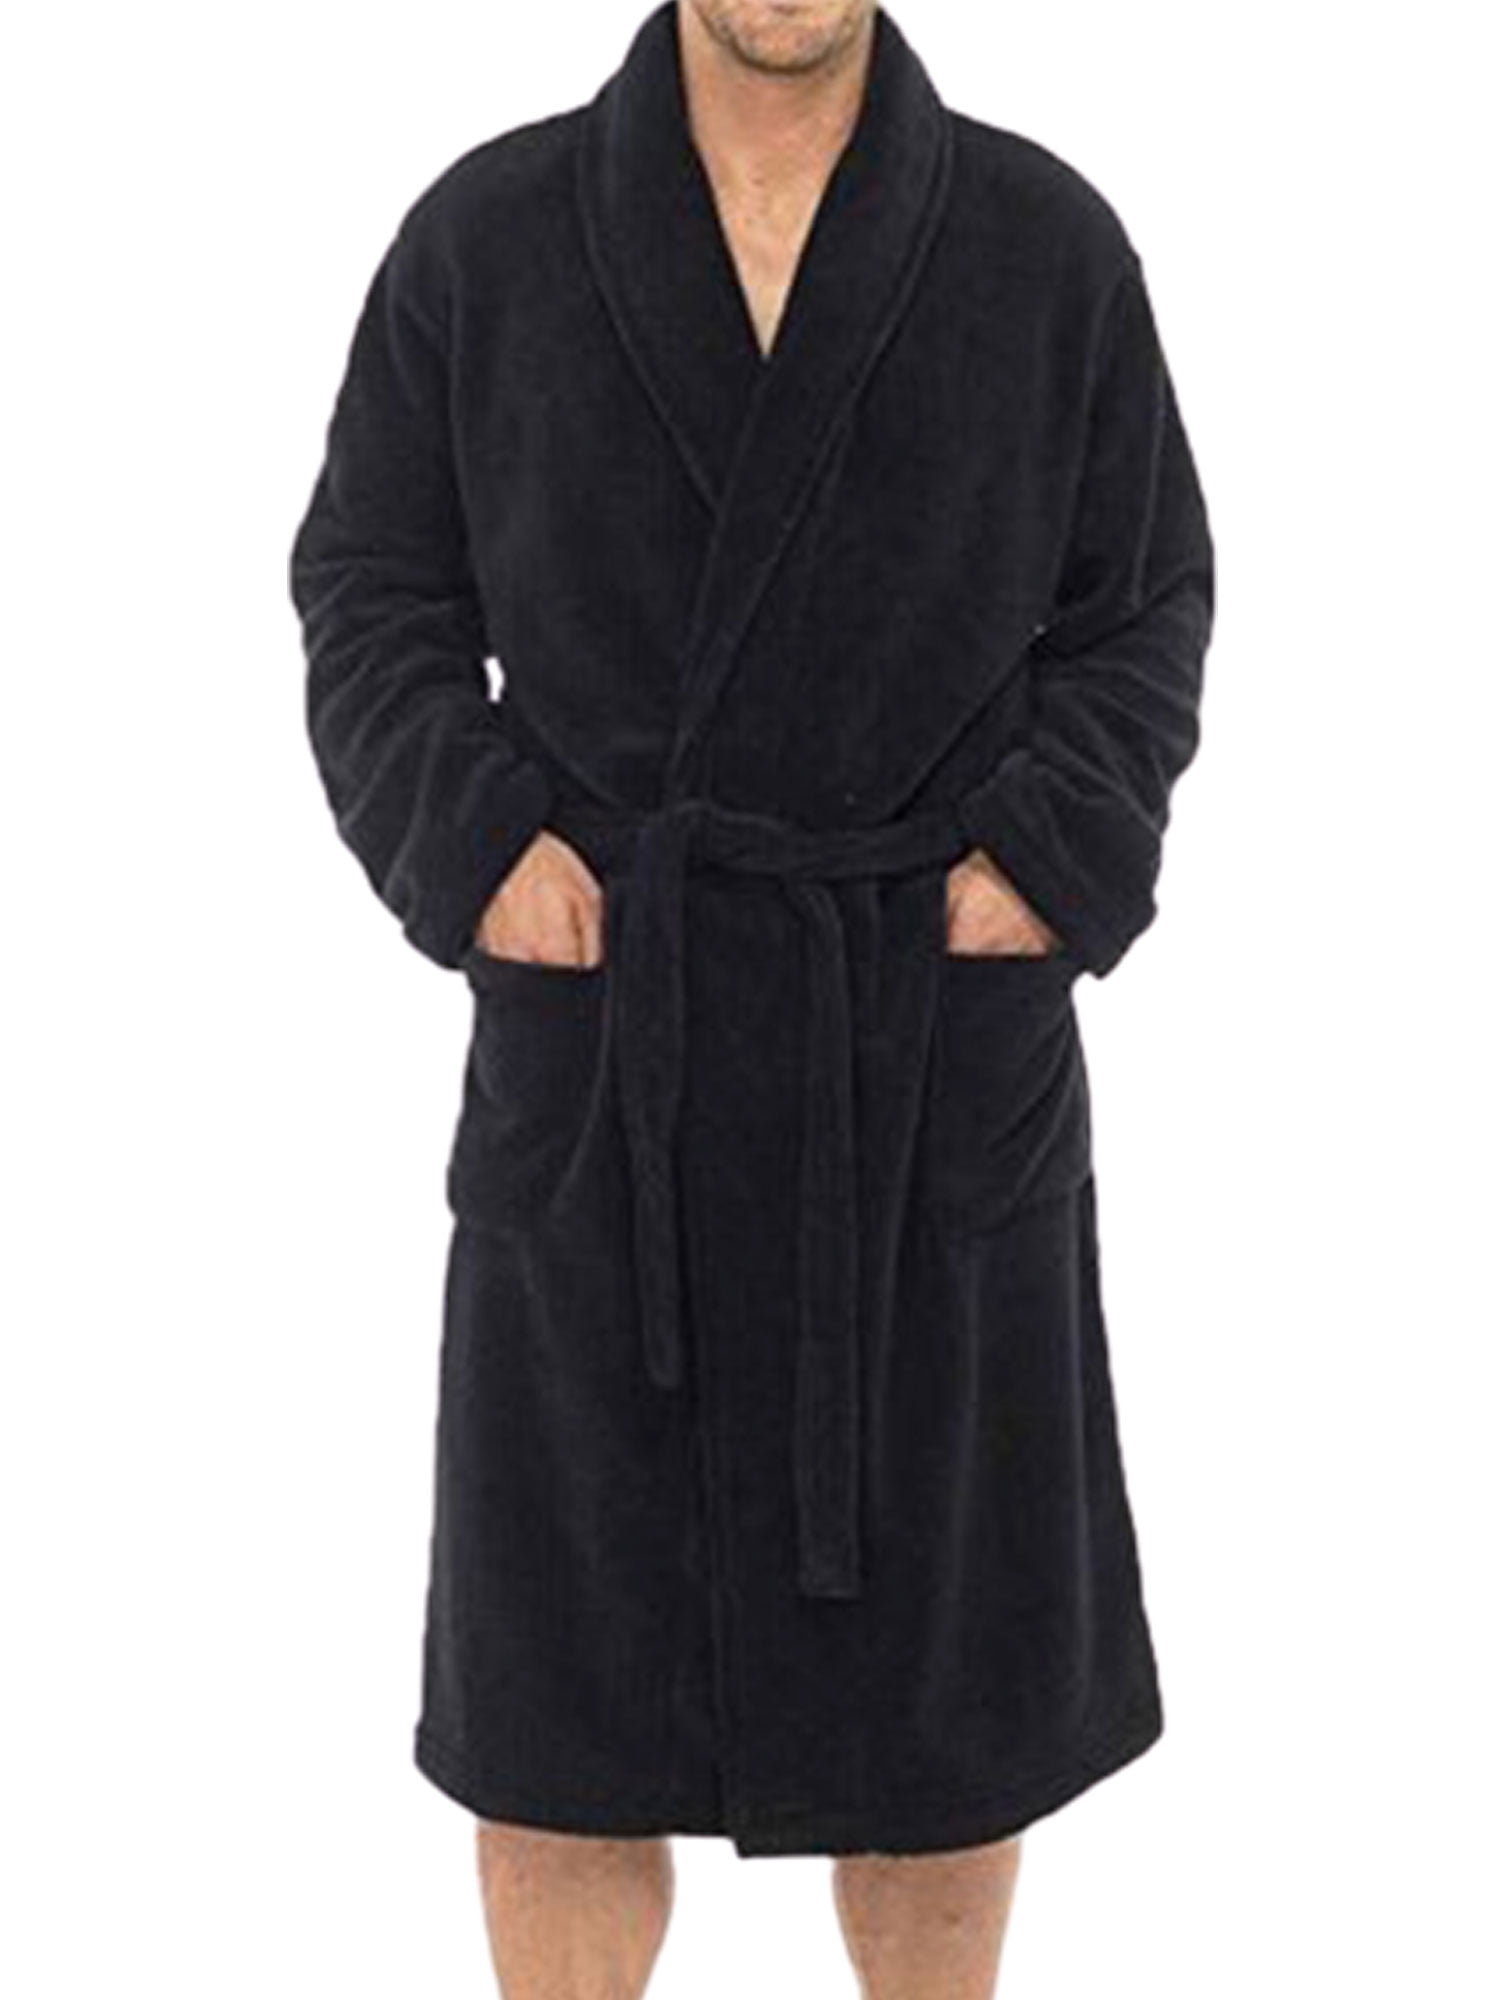 Mens Dressing Gown - Etsy